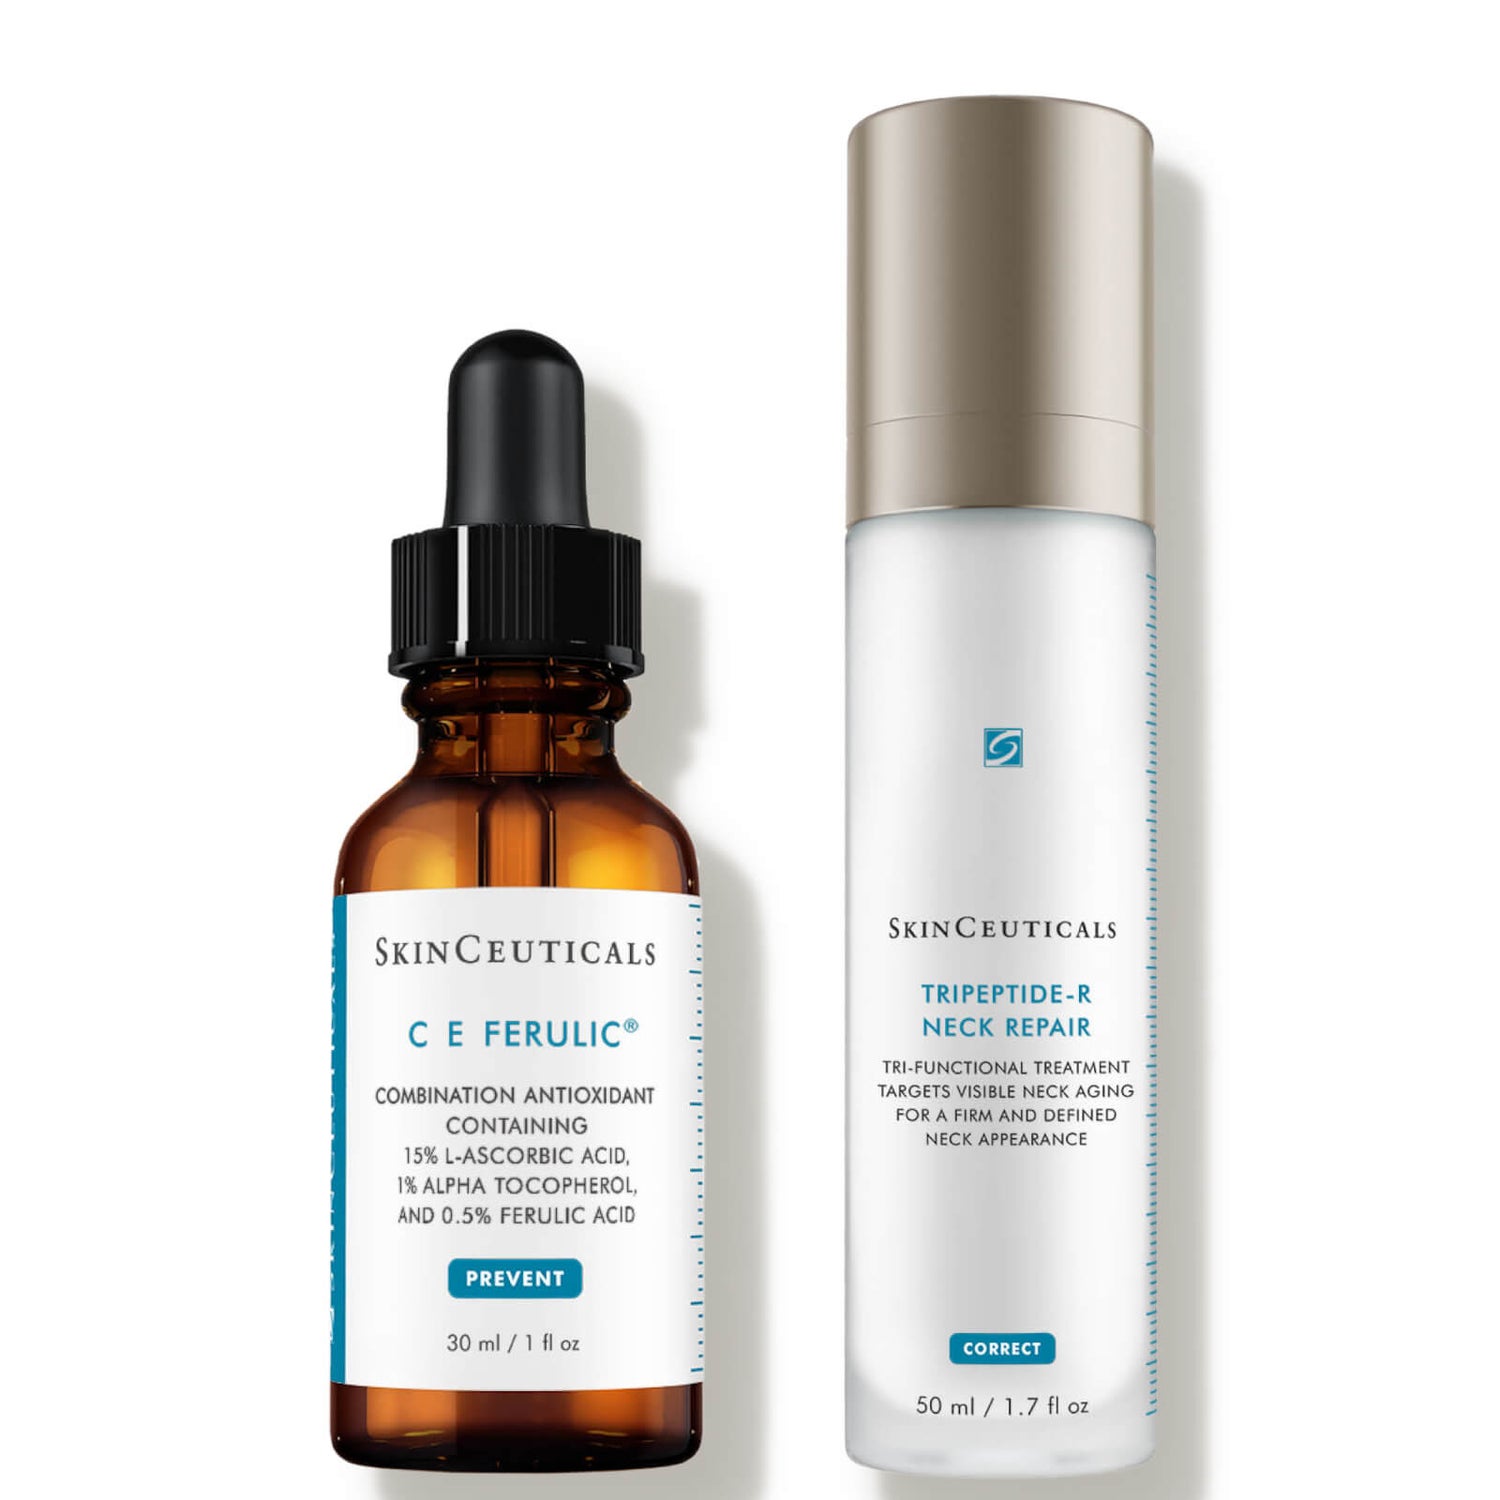 SkinCeuticals Anti-Aging Kit from The Neck Up Bundle